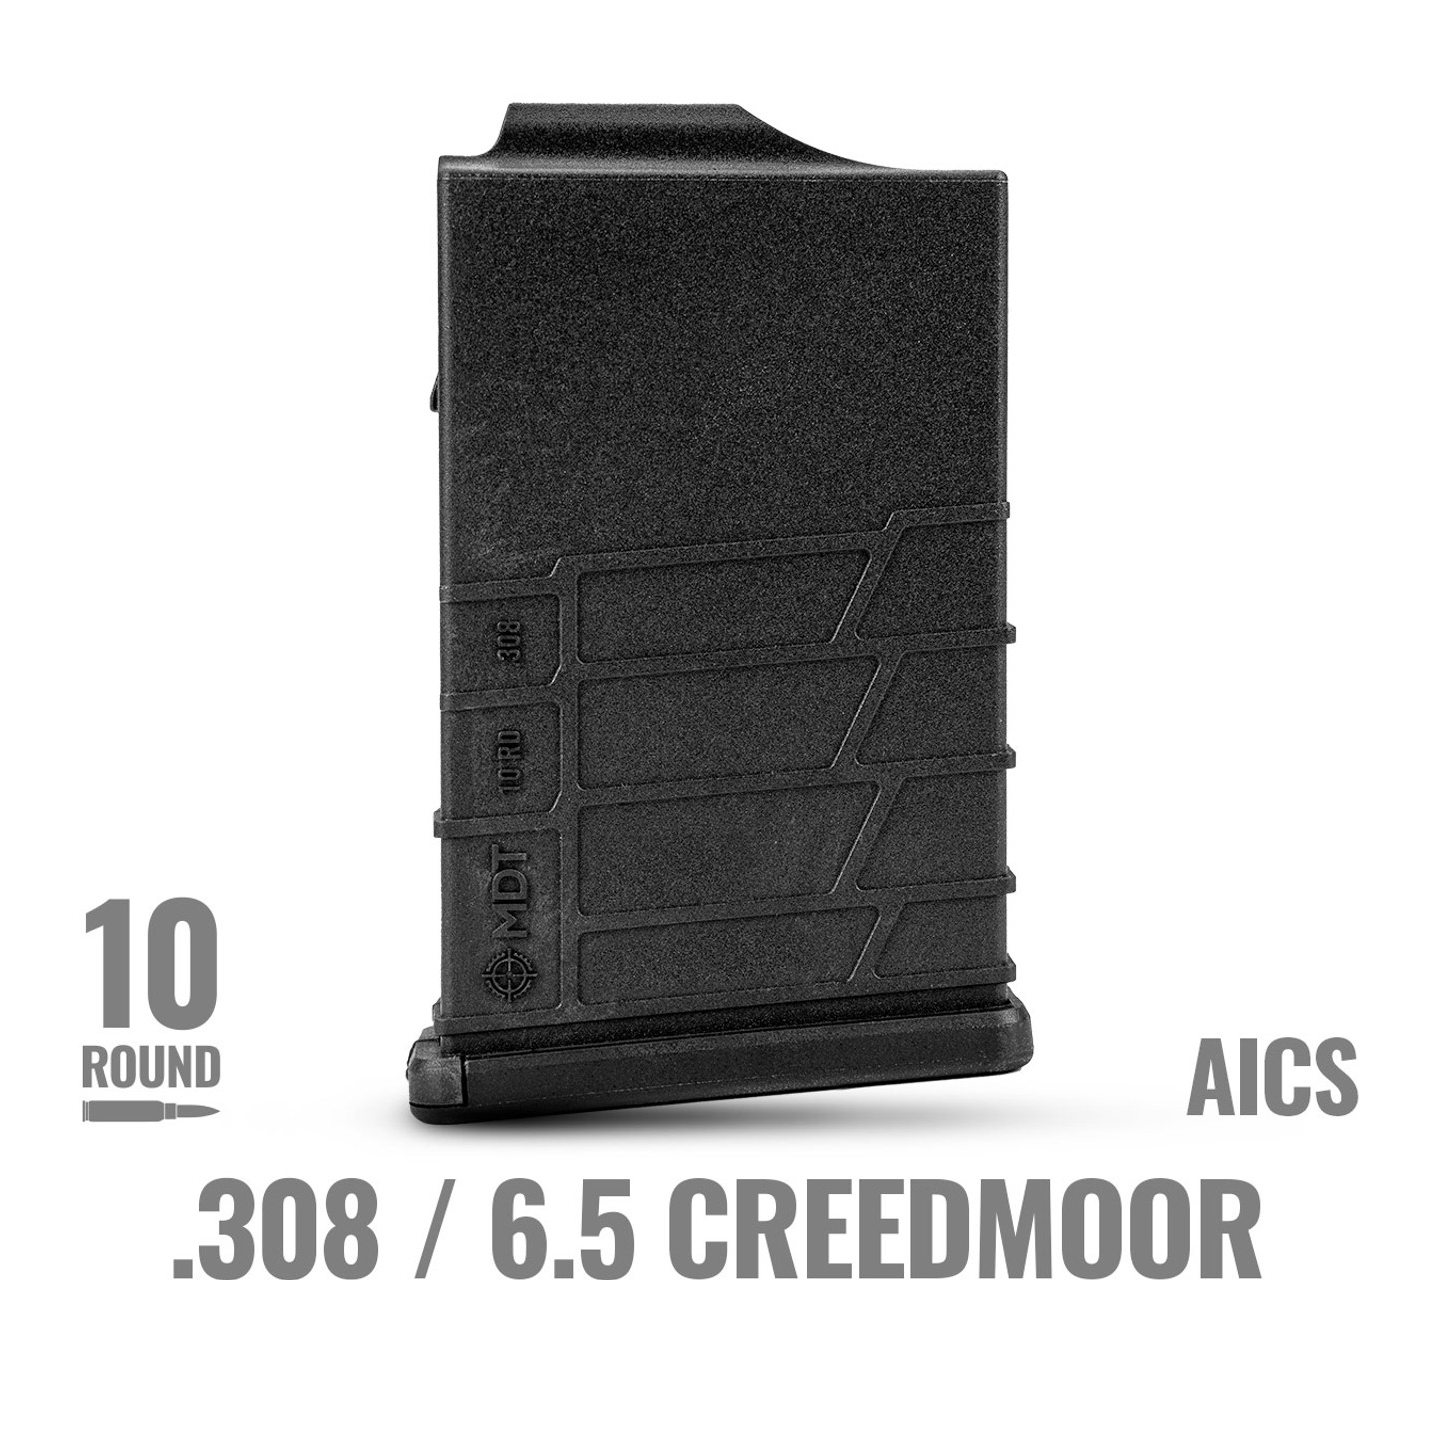 will this mag fit in a howa 1500?